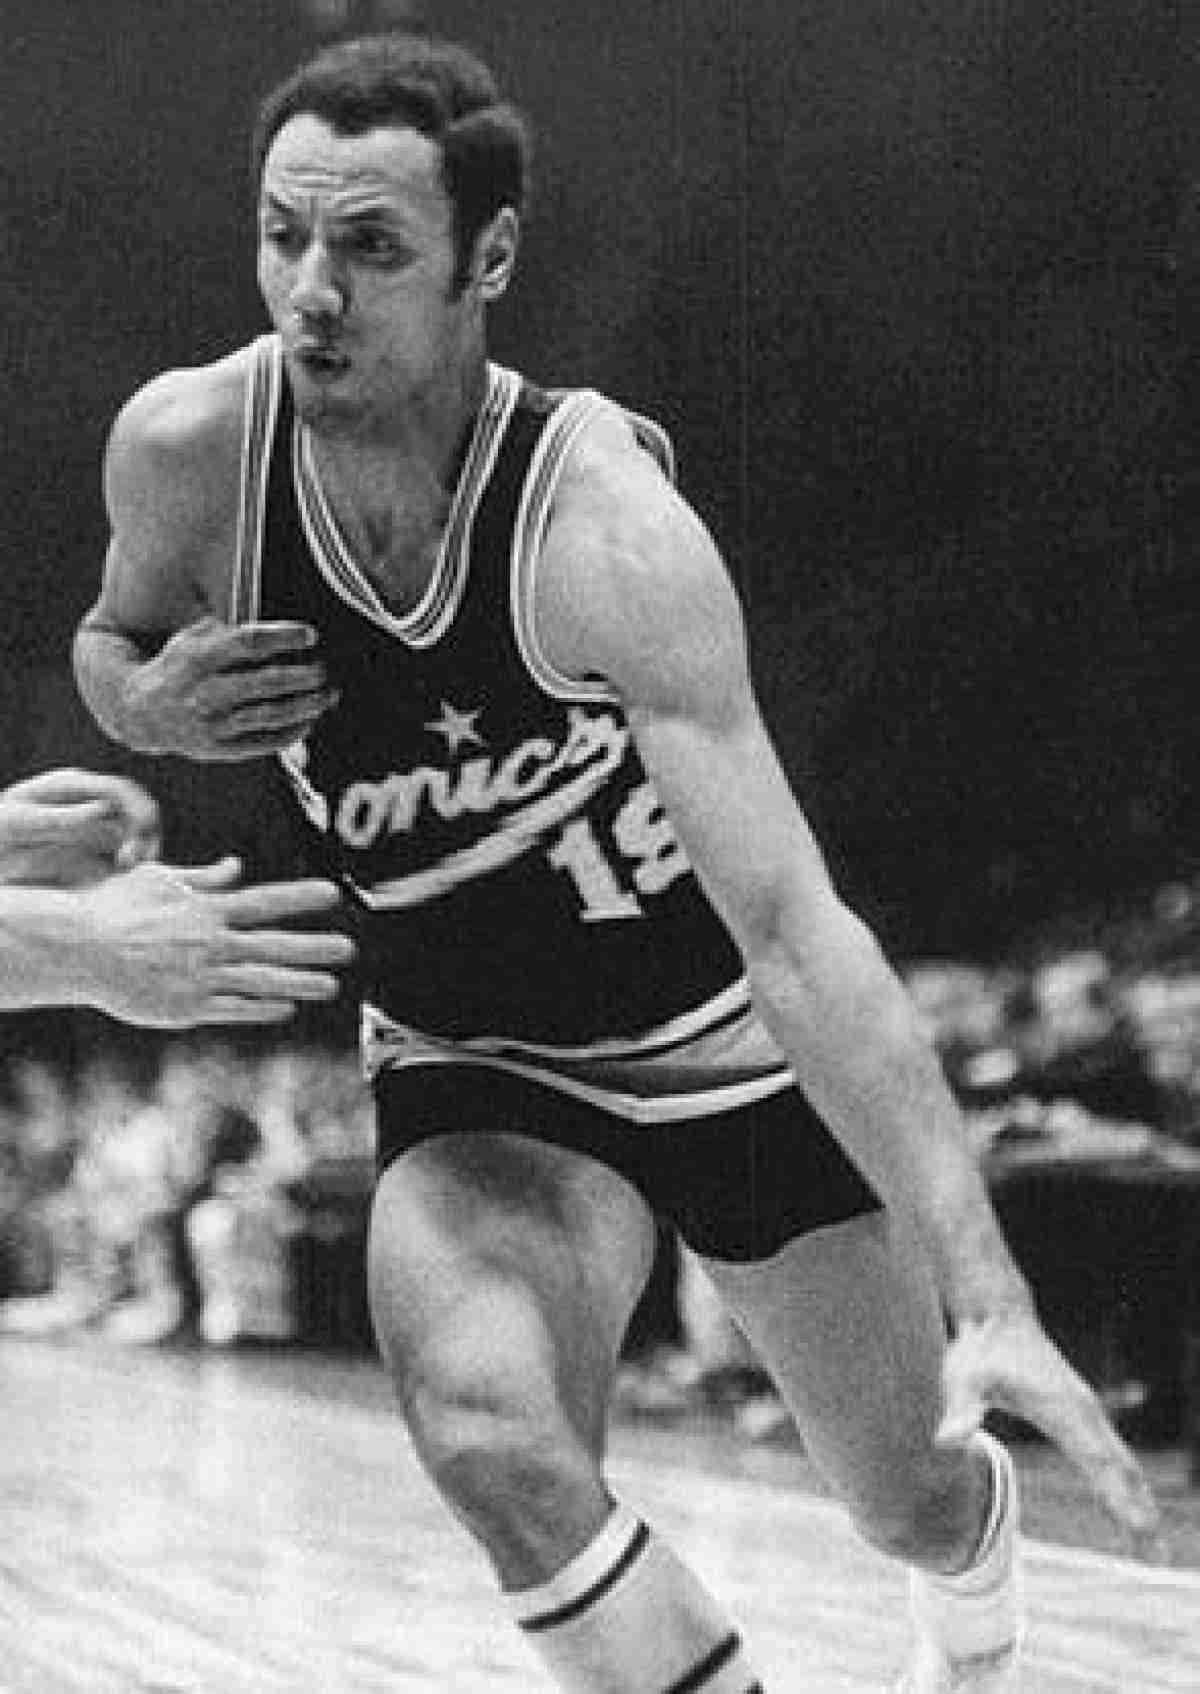 Not in Hall of Fame - 14. Lenny Wilkens